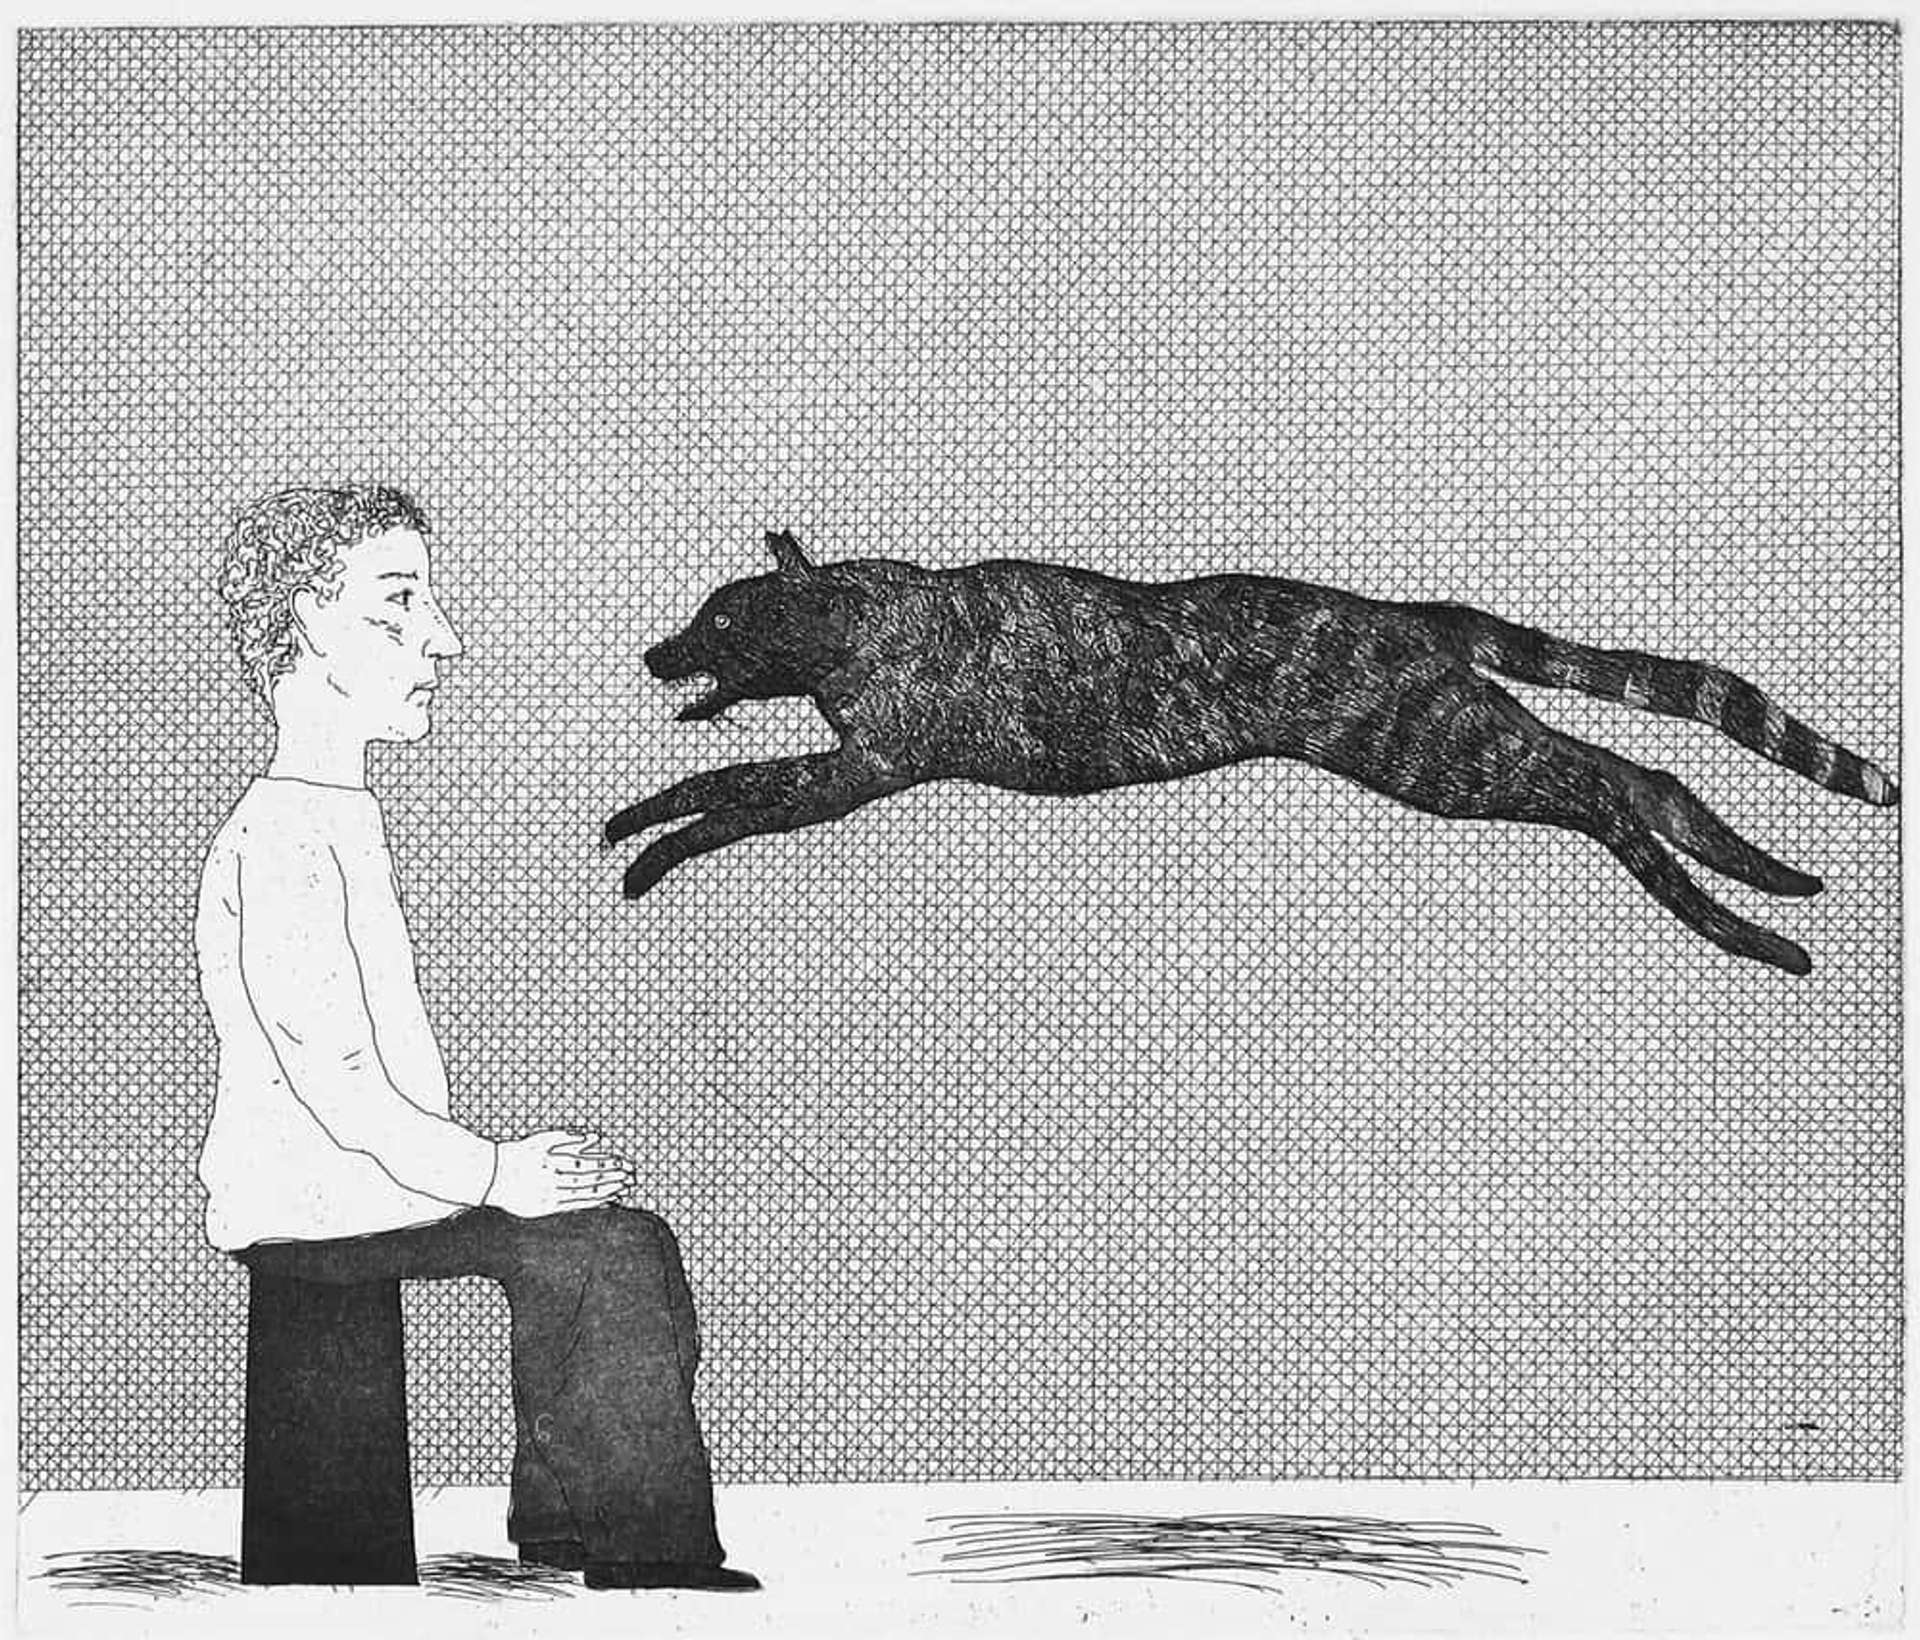 A print by David Hockney where a boy sits in profile, his hands calmly placed together as if in a gesture of welcome, while a wild black cat springs towards him. The background is cross hatched, the pair’s shadows scribbled in.